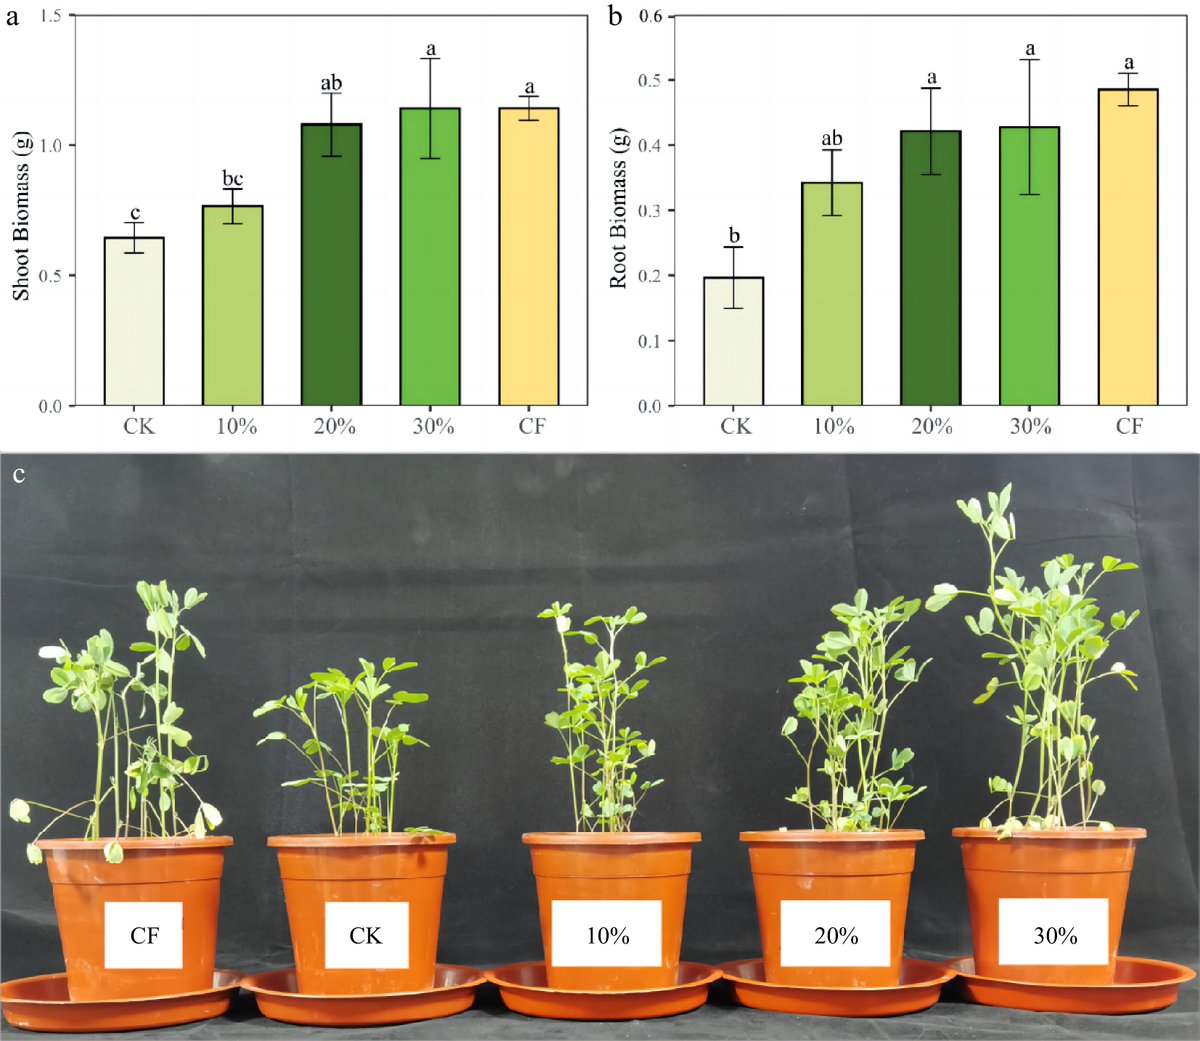 Investigating spent mushroom substrate (SMS) impact on alfalfa growth in degraded soil. Results show 20% SMS significantly enhances nutrient content, supporting sustainable agriculture. #SoilHealth #AgriculturalResearch
Details: maxapress.com/article/doi/10…